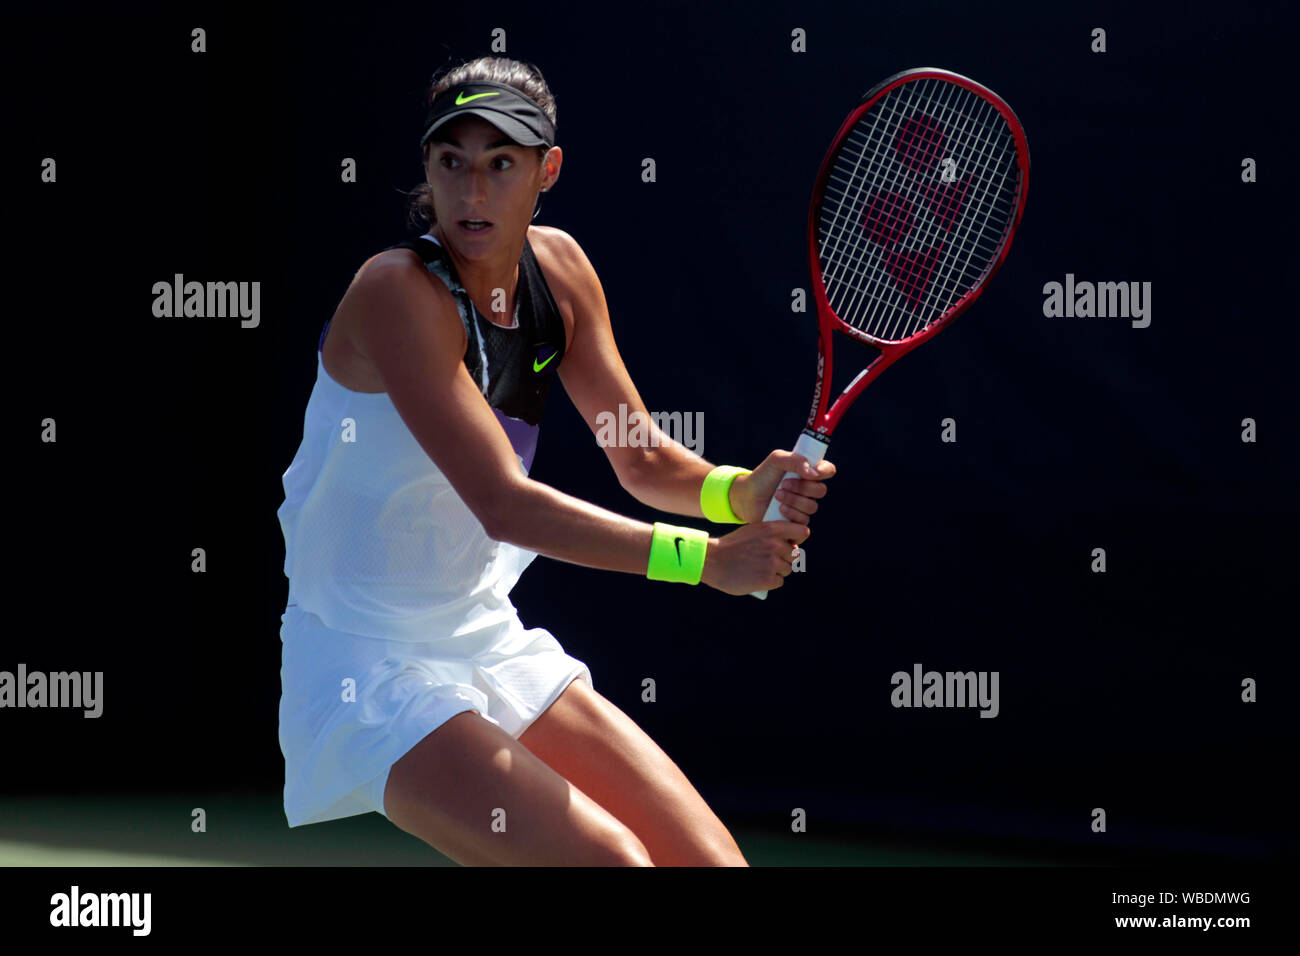 New York, USA. 26th Aug, 2019. Flushing Meadows, New York, USA. August 26, 2019.   Caroline Garcia, of France, the number 27 seed in action against Ons Jabeur of Tunisia in first round action at the US Open. Garcia lost the match in straight sets. Credit: Adam Stoltman/Alamy Live News Credit: Adam Stoltman/Alamy Live News Stock Photo